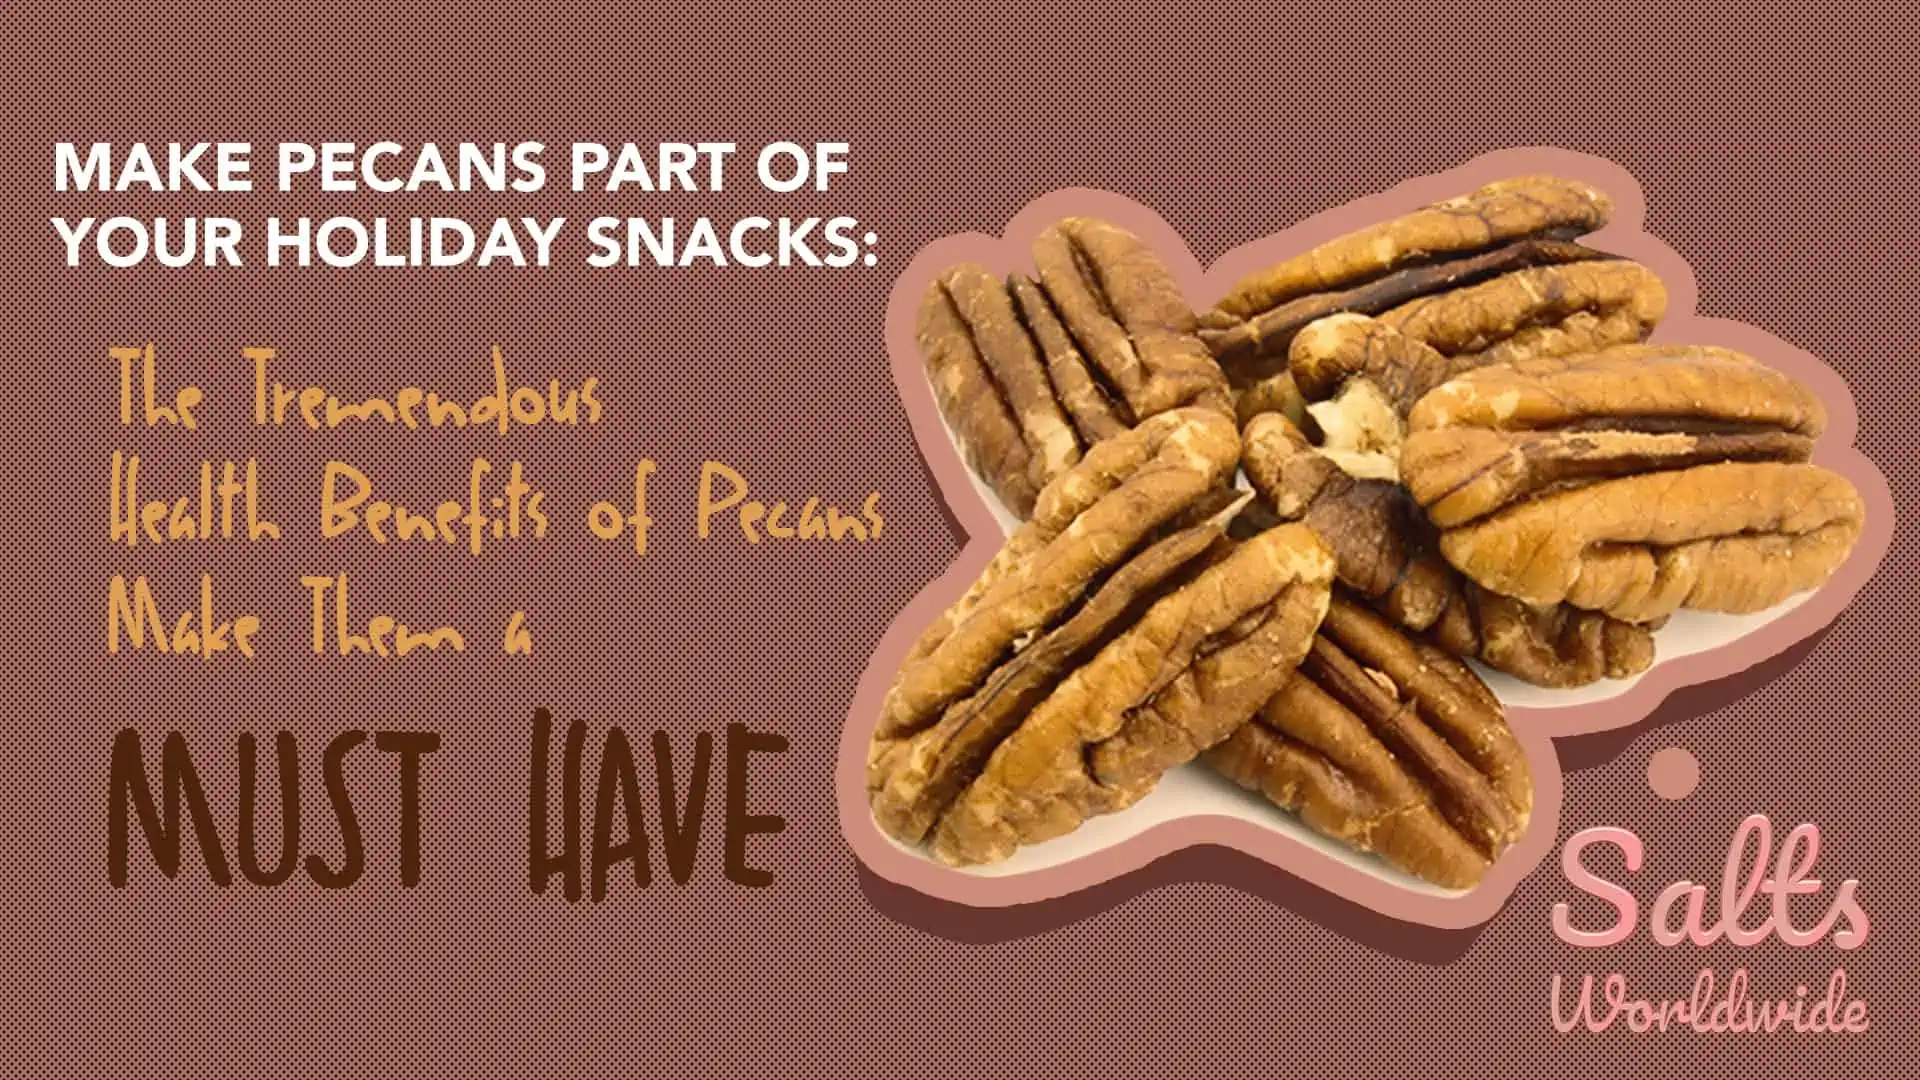 Make Pecans Part of Your Holiday Snacks The Tremendous Health Benefits of Pecans Make Them a Must Have - Featured image